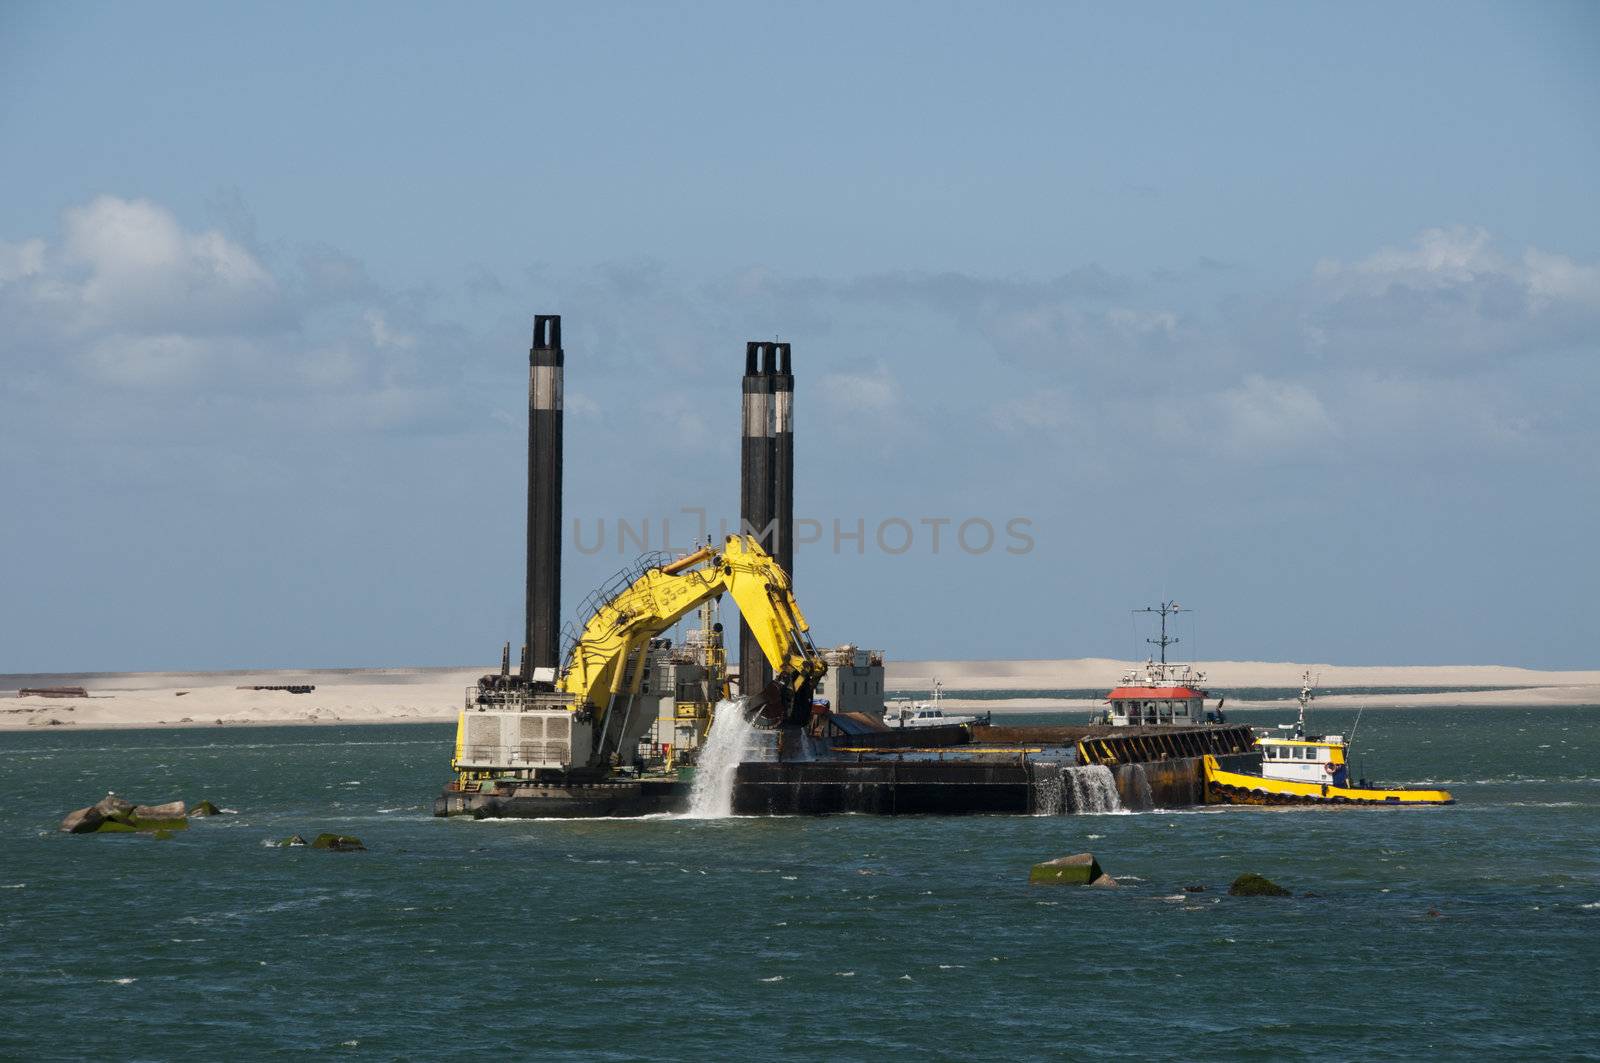 dredger for winning new land by compuinfoto